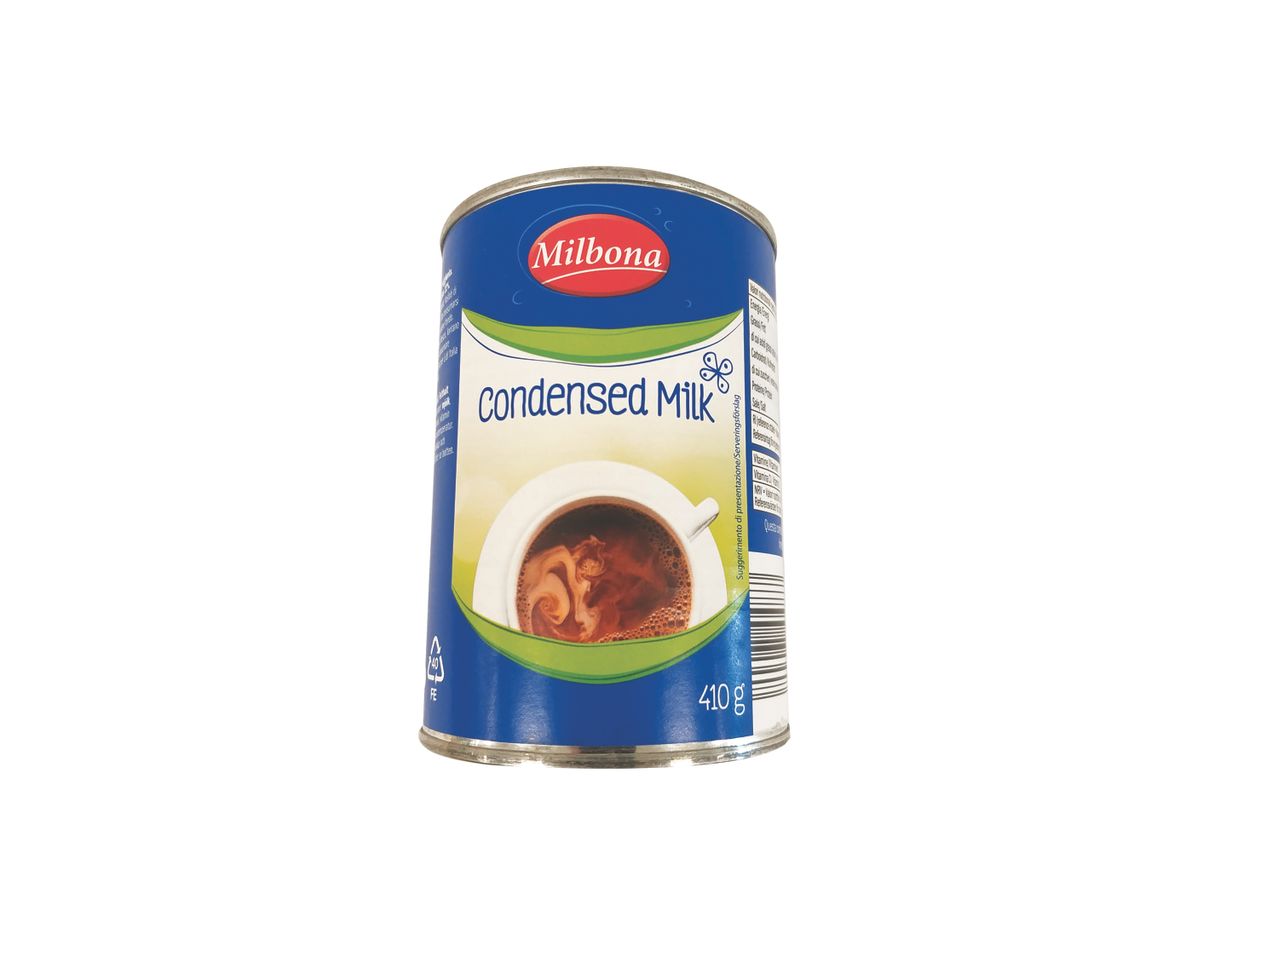 Go to full screen view: Condensed Milk - Image 1